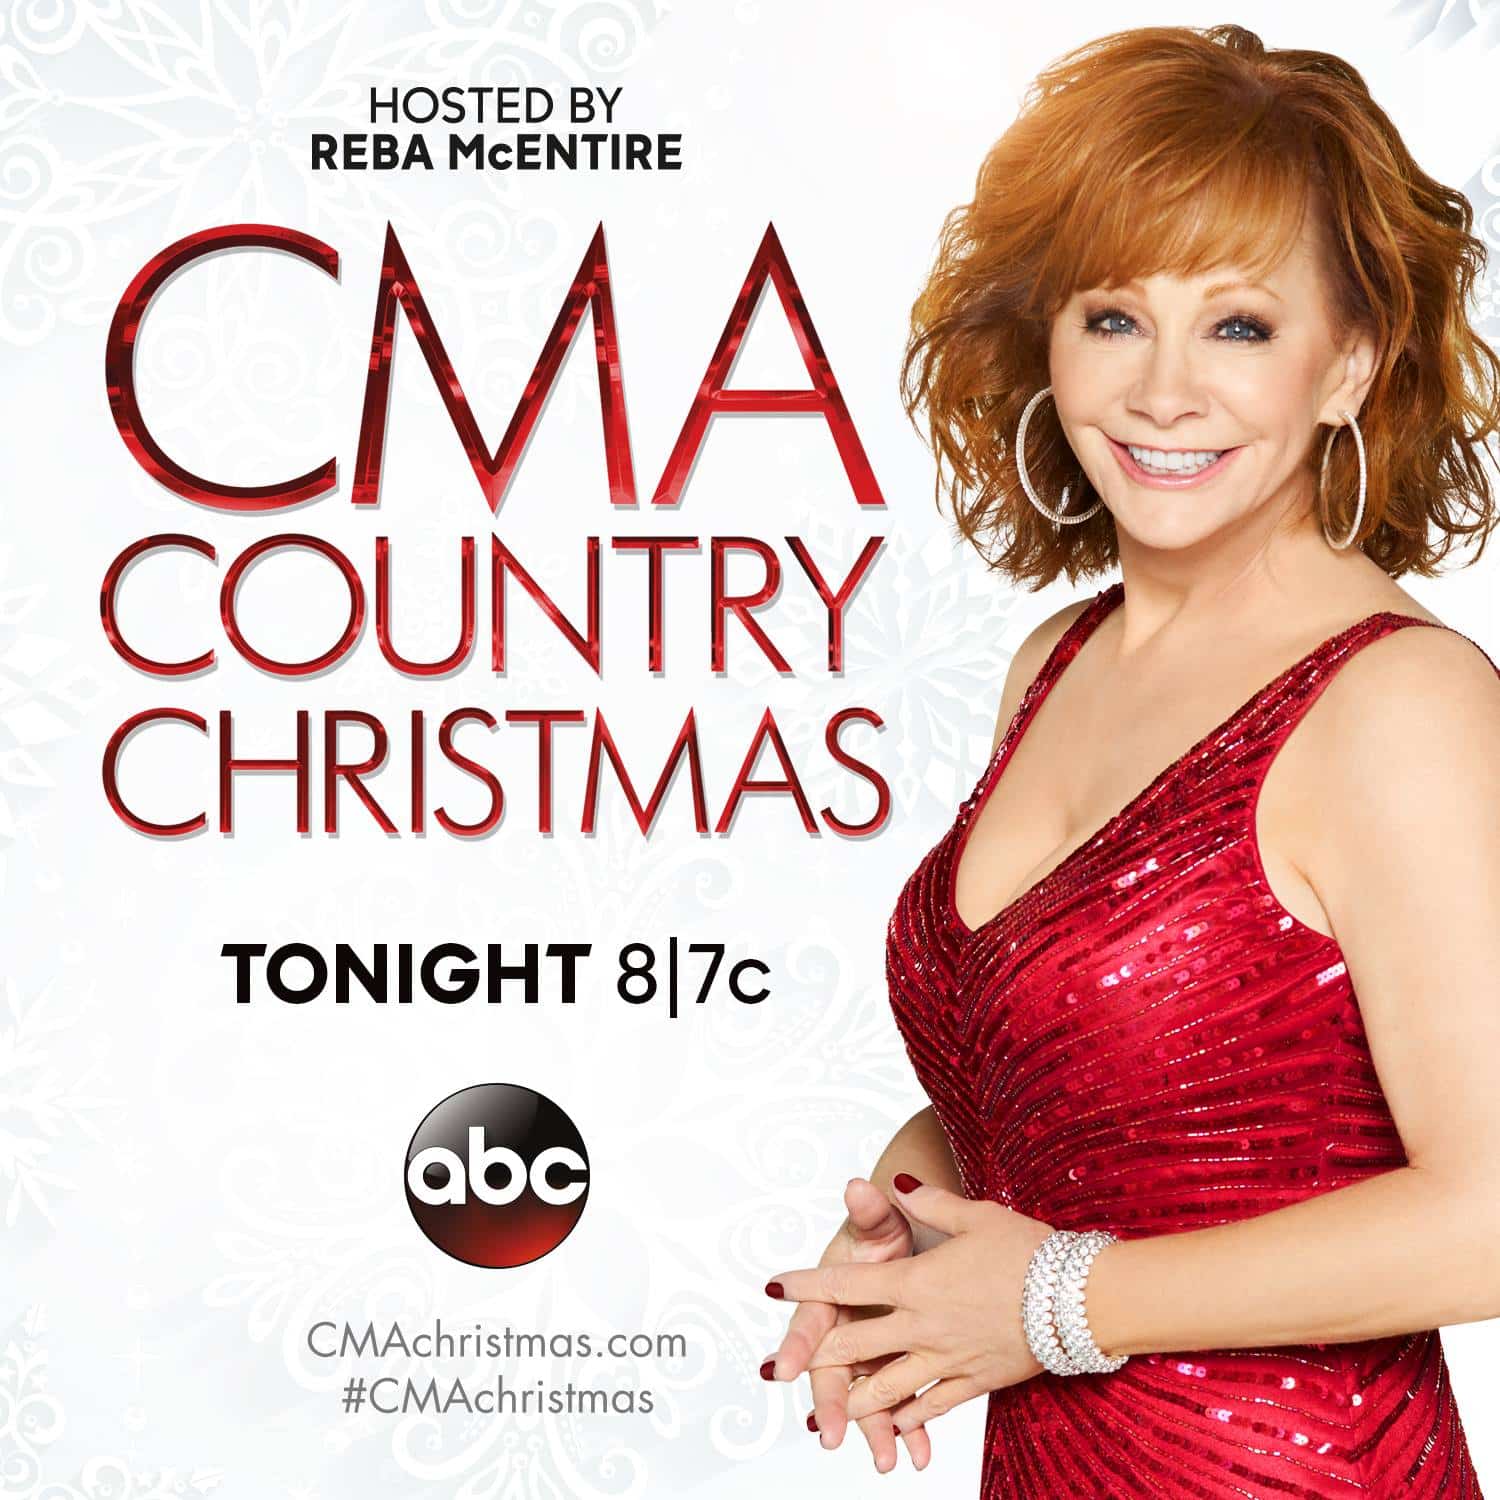 Reba McEntire was previously the host of CMA Country Christmas